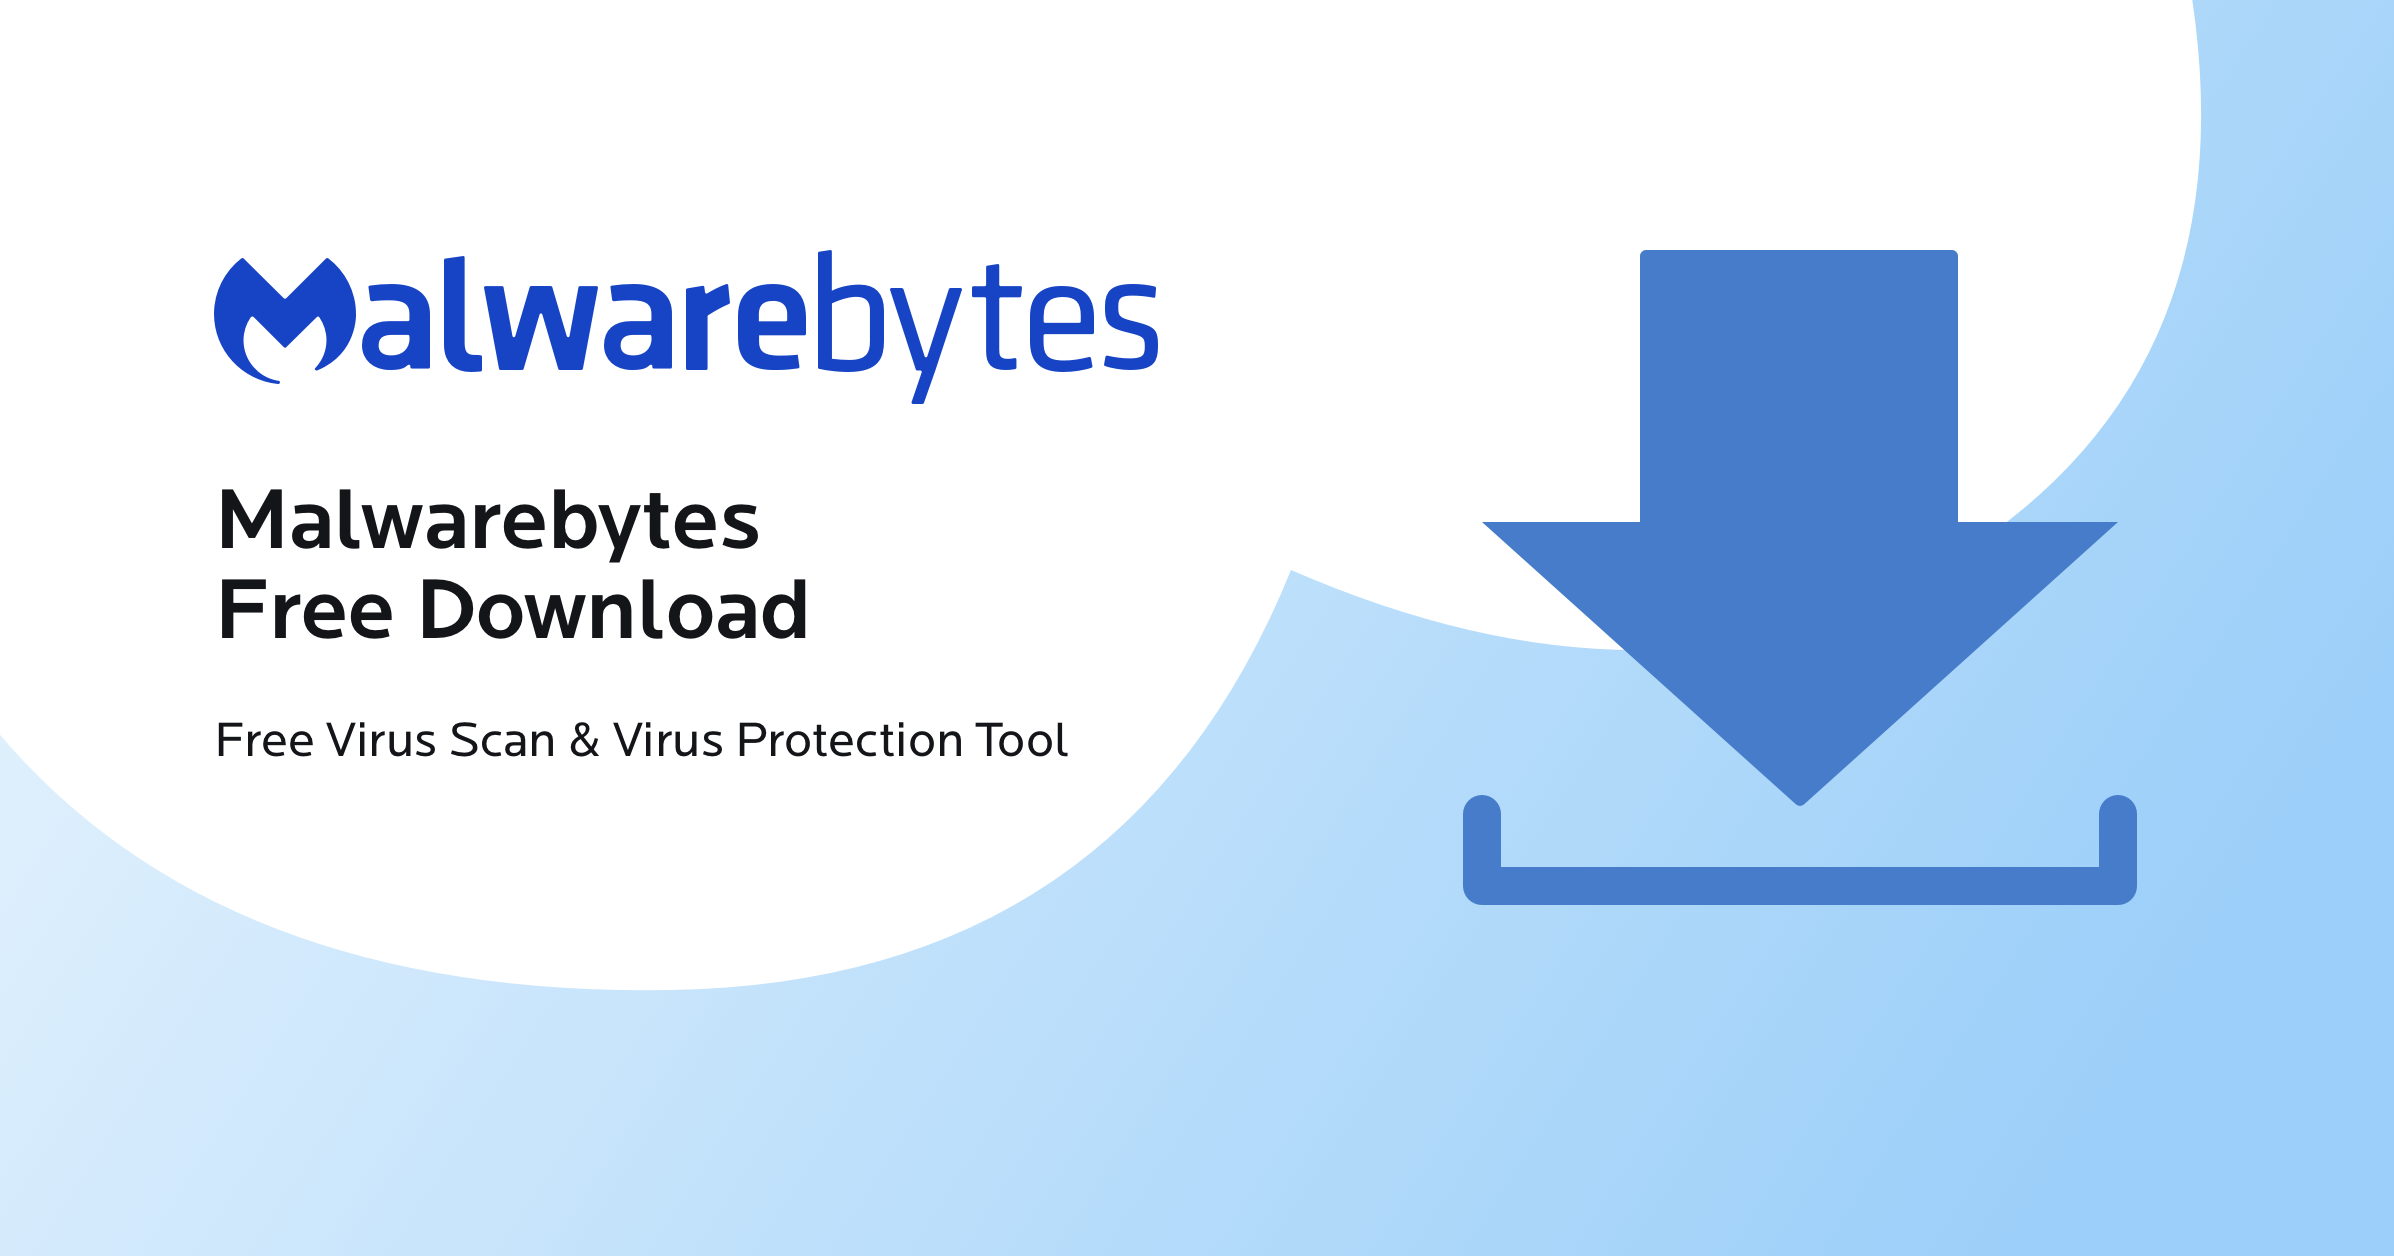 Antivirus software: Use a reliable antivirus program to scan and remove baka.loader.exe from your system. Ensure the antivirus is up to date for maximum effectiveness.
Malwarebytes: This powerful anti-malware tool can detect and eliminate baka.loader.exe along with other potential threats. Run a full system scan using Malwarebytes.